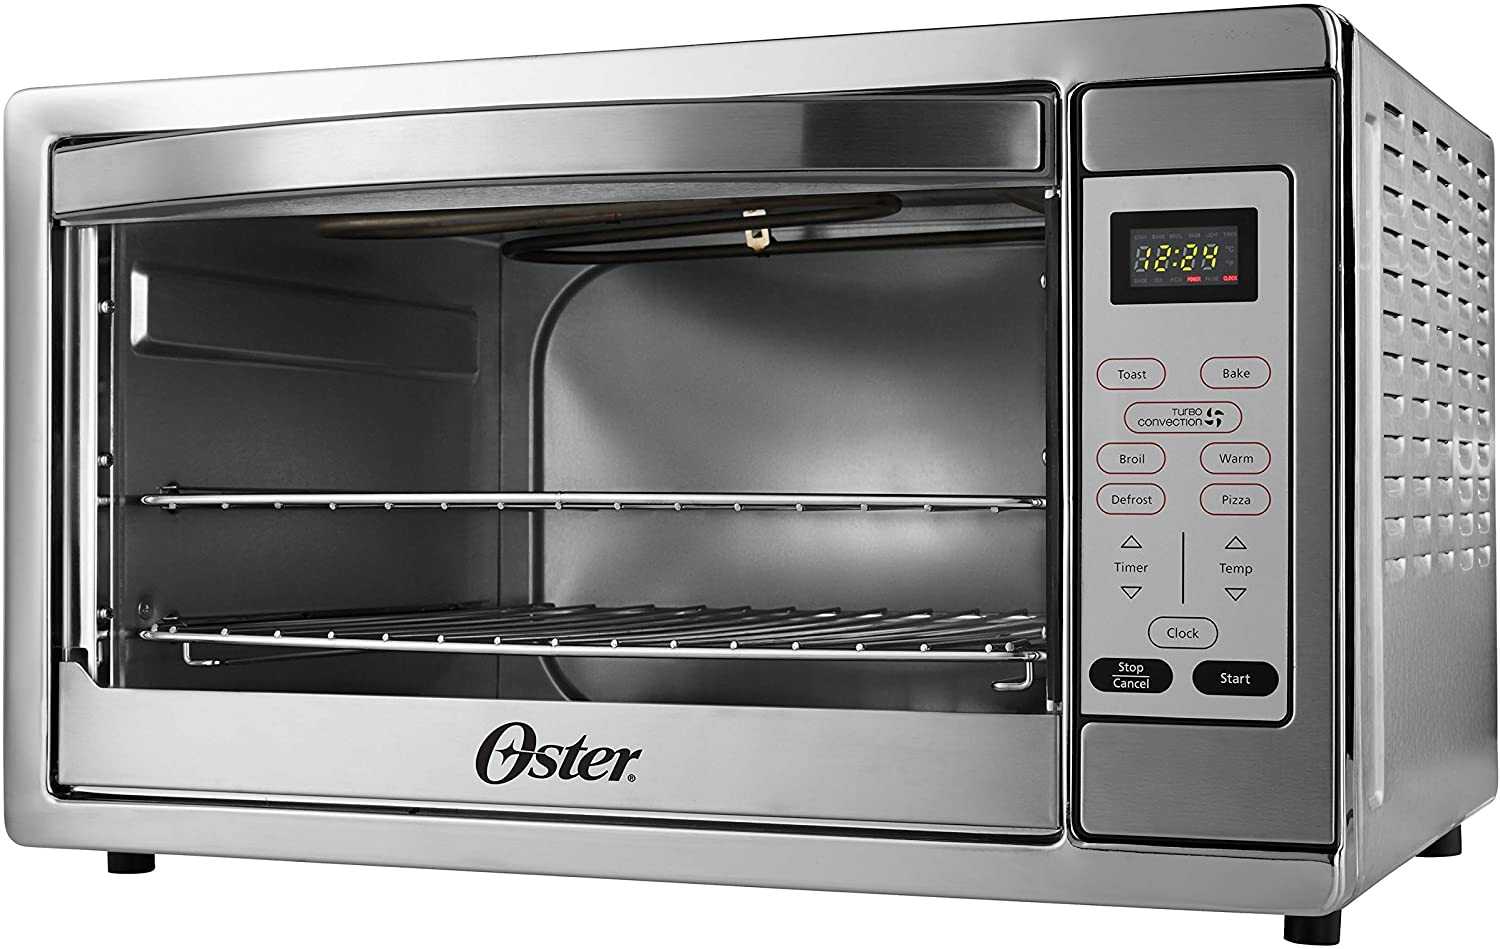 https://www.corriecooks.com/wp-content/uploads/2019/01/Oster-Convection-Oven.jpg